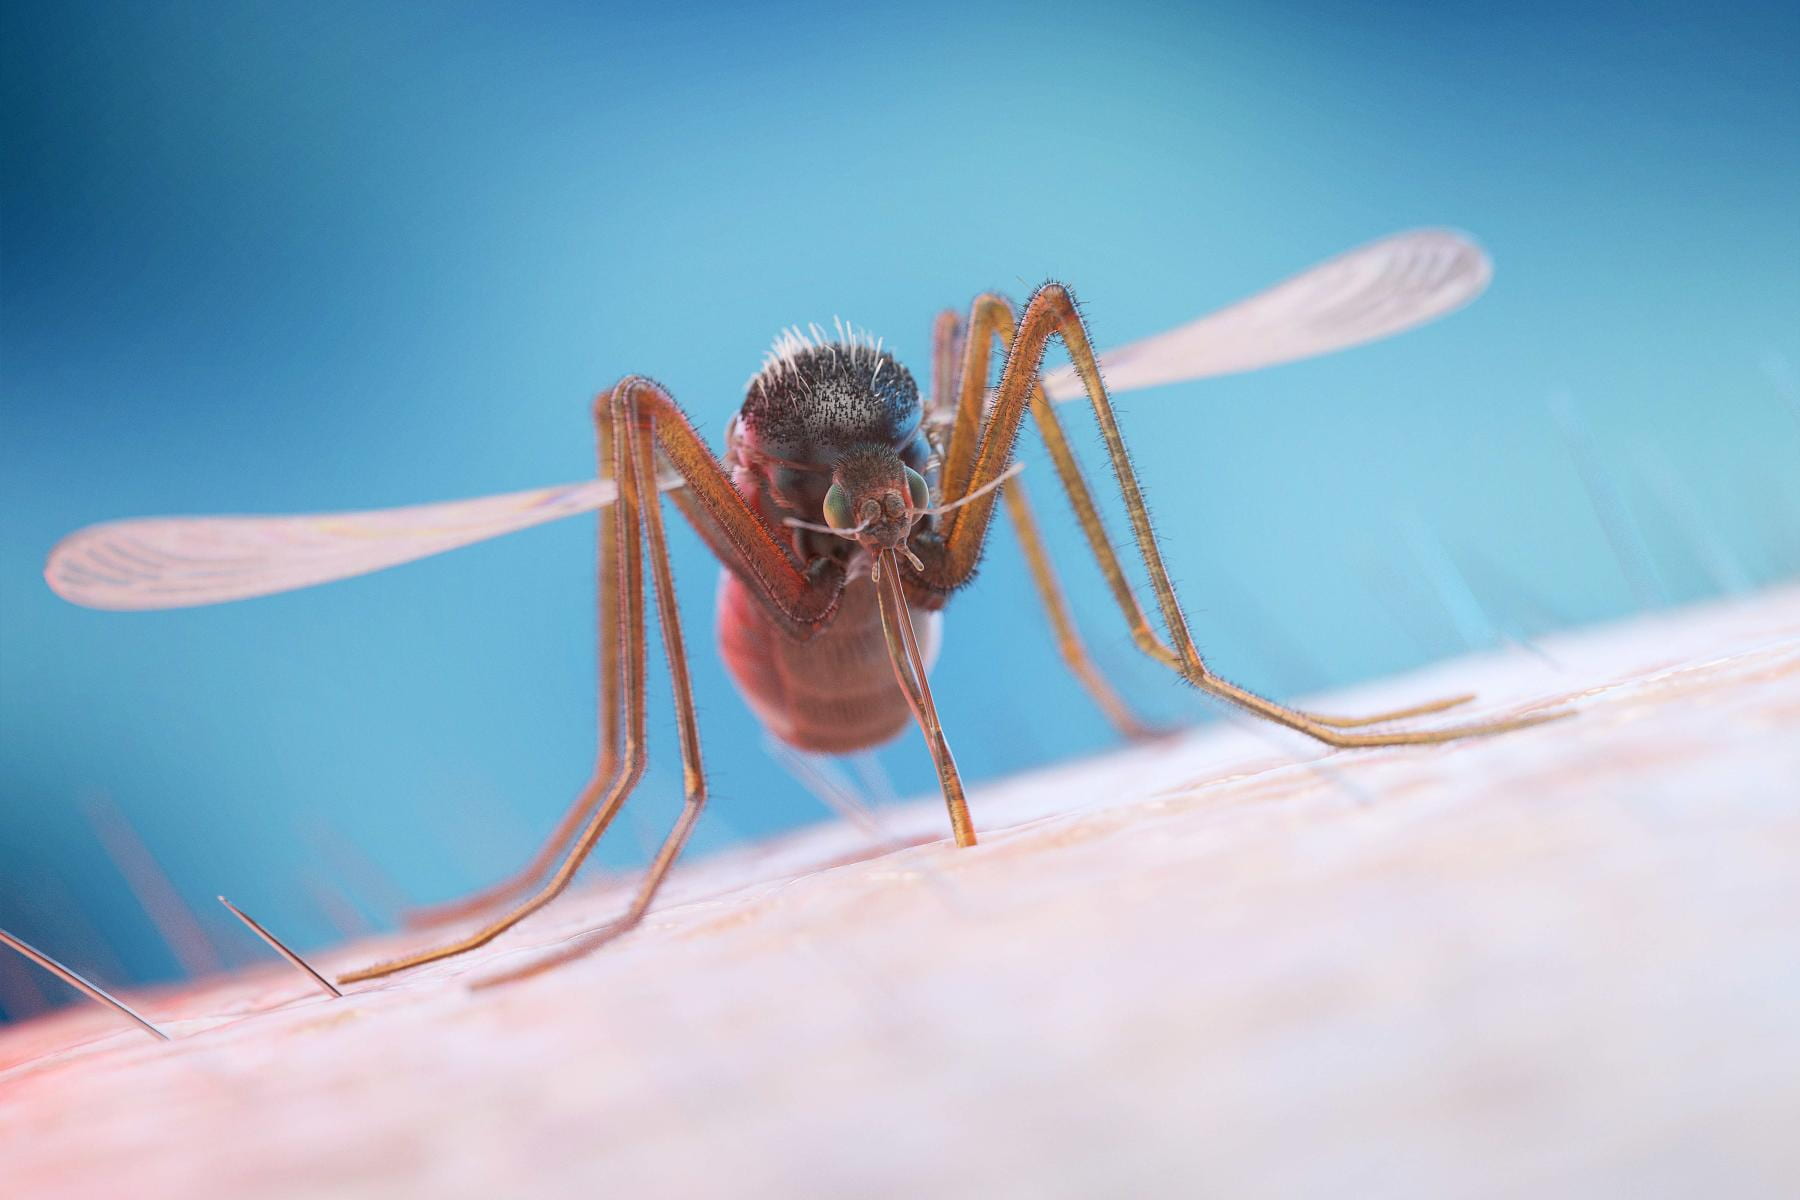 Tracking the movement of mosquito stowaways